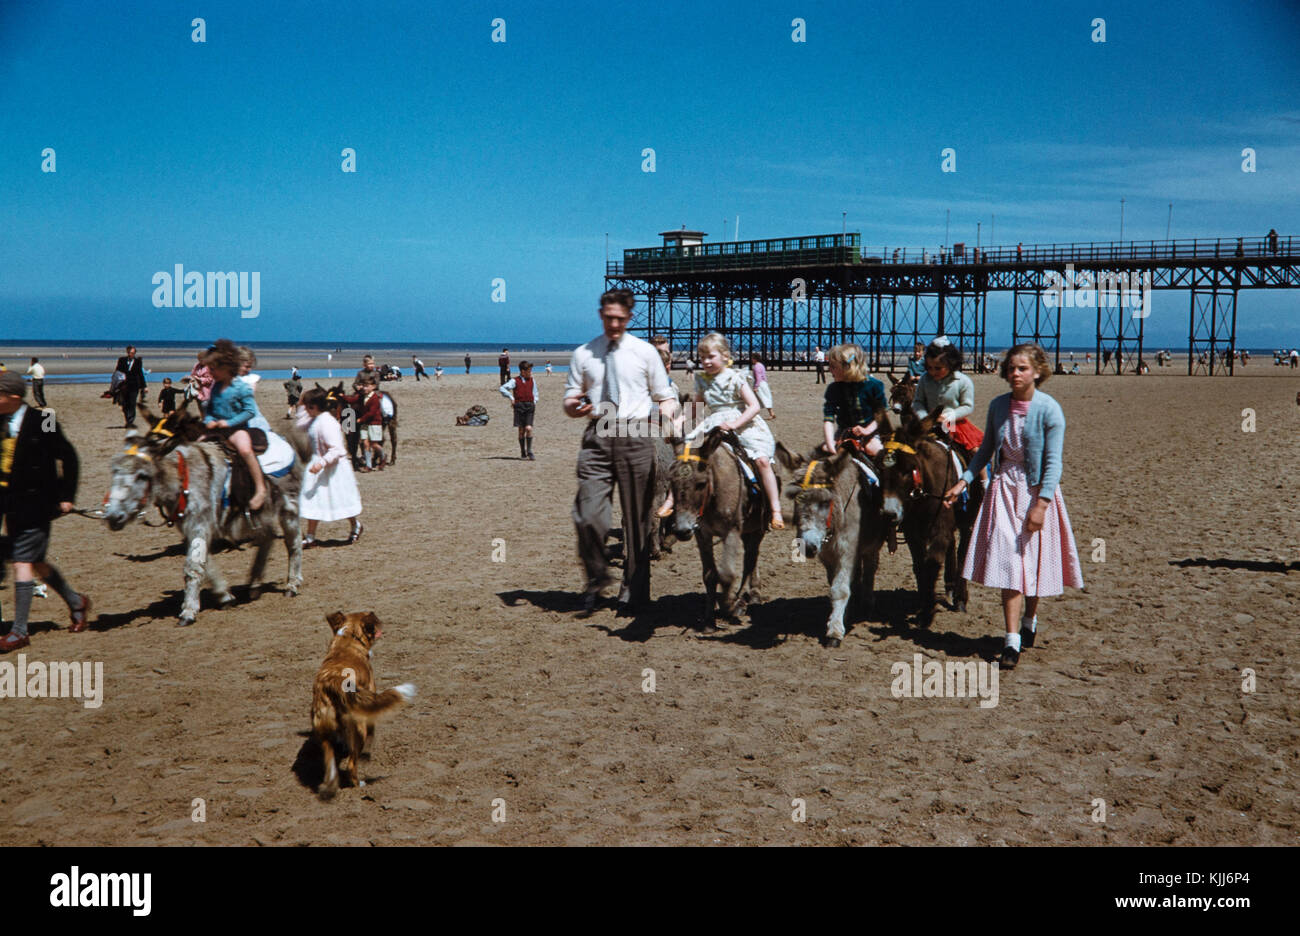 Photo taken in 1958 showing children being given rides on donkeys on the beach at Rhyl in North Wales. Stock Photo